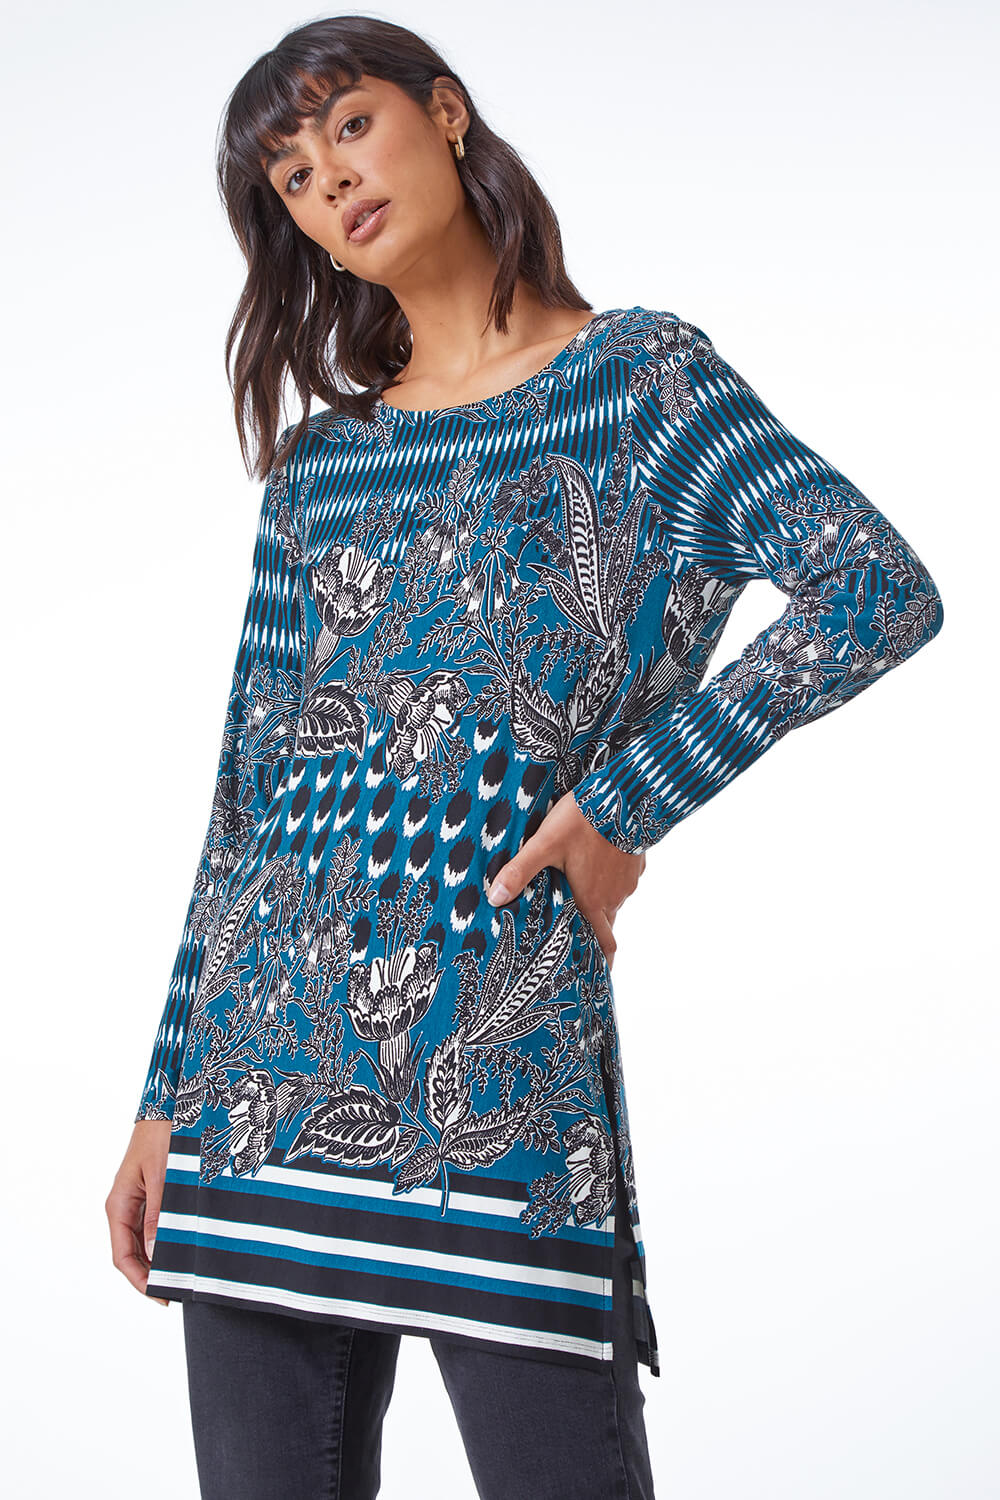 Teal Floral Border Print Longline Stretch Tunic, Image 4 of 5